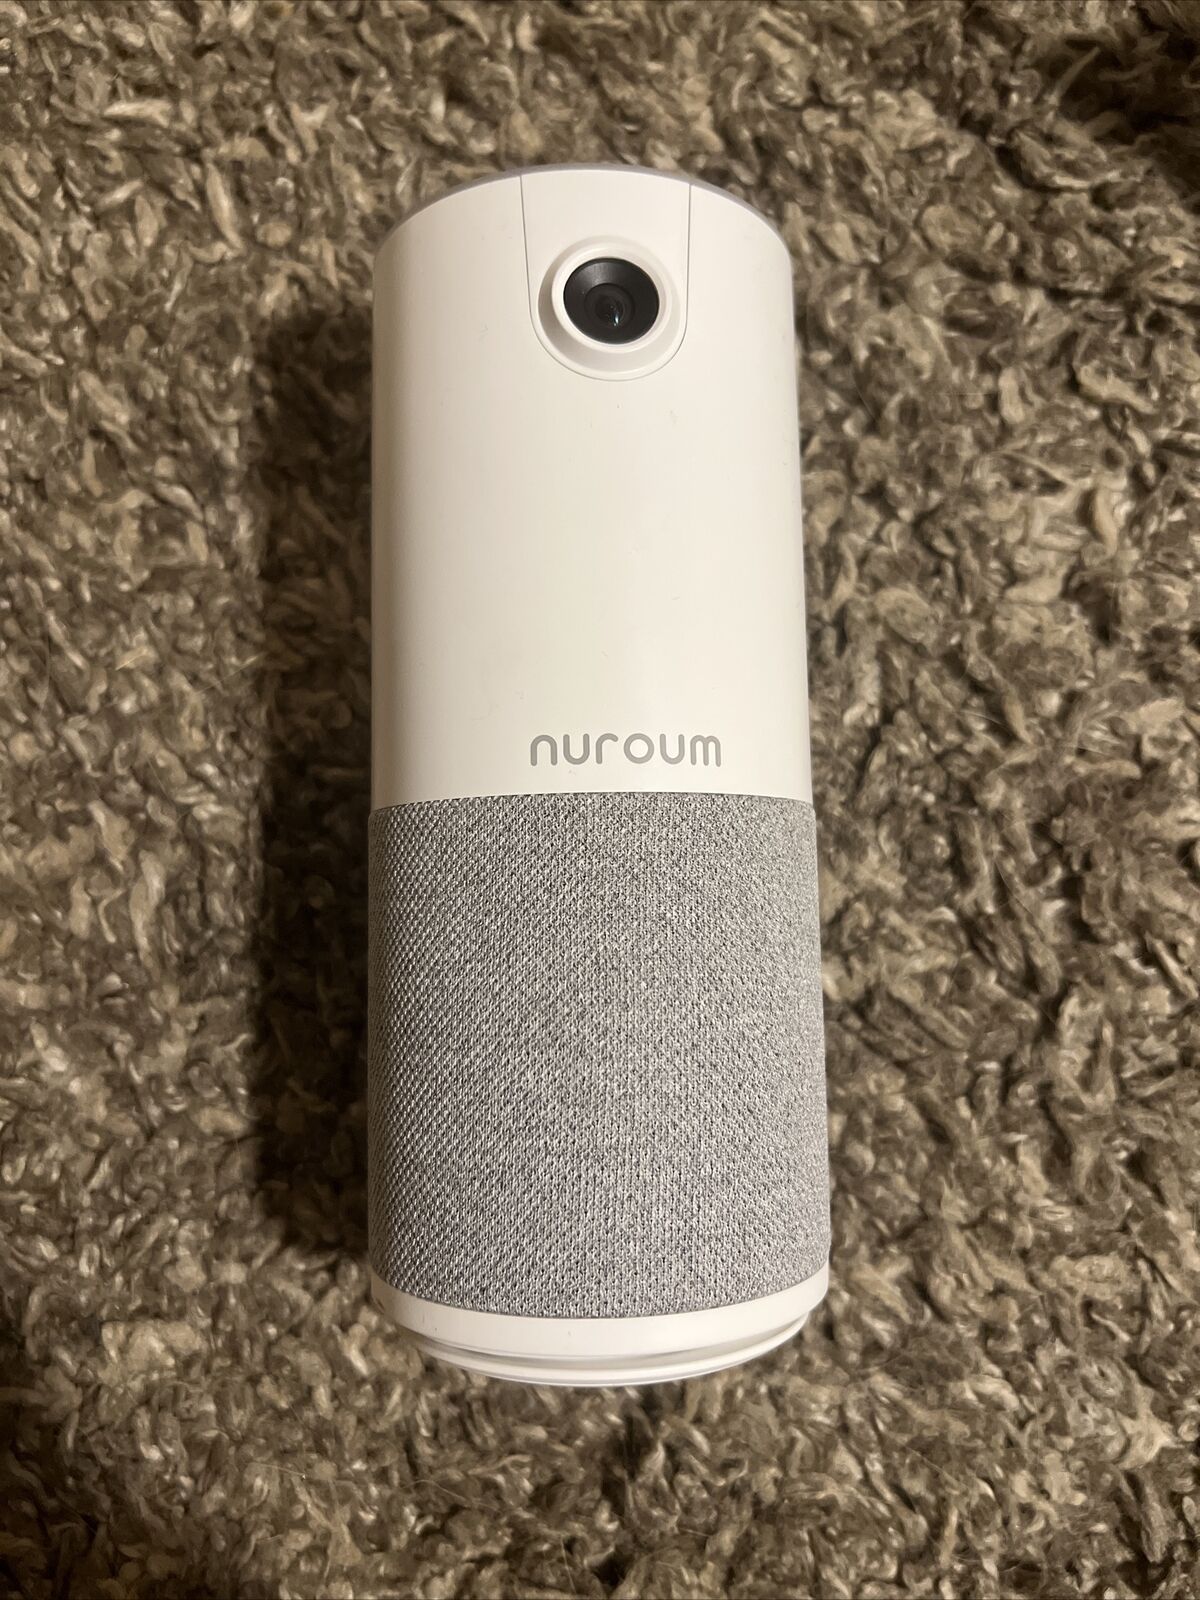 Nuroum Conference Video Call All-in-1 Webcam Microphone Speaker Noise-Cancel USB